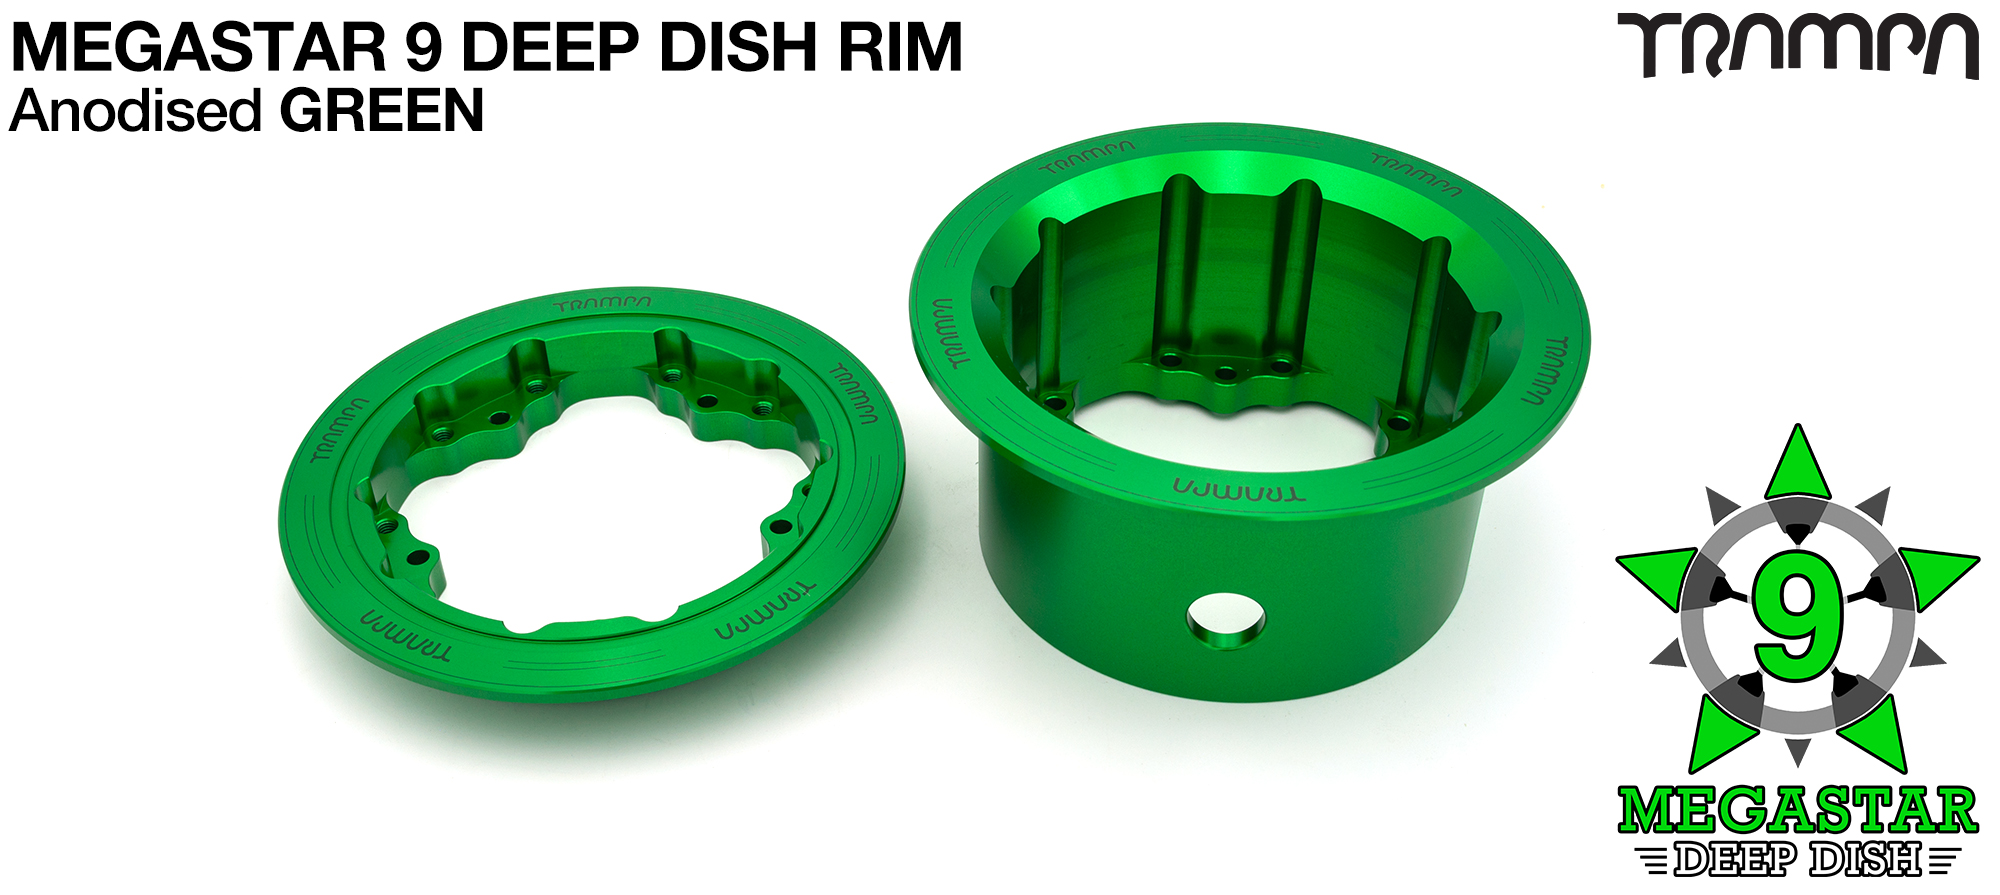 MEGASTAR 9 DEEP-DISH Rims Measure 3.75/4x 3 Inch. The Bearings are positioned OFF-SET & accept 4 Inch Rim Tyres to make 9 or 10 inch Wheels - GREEN